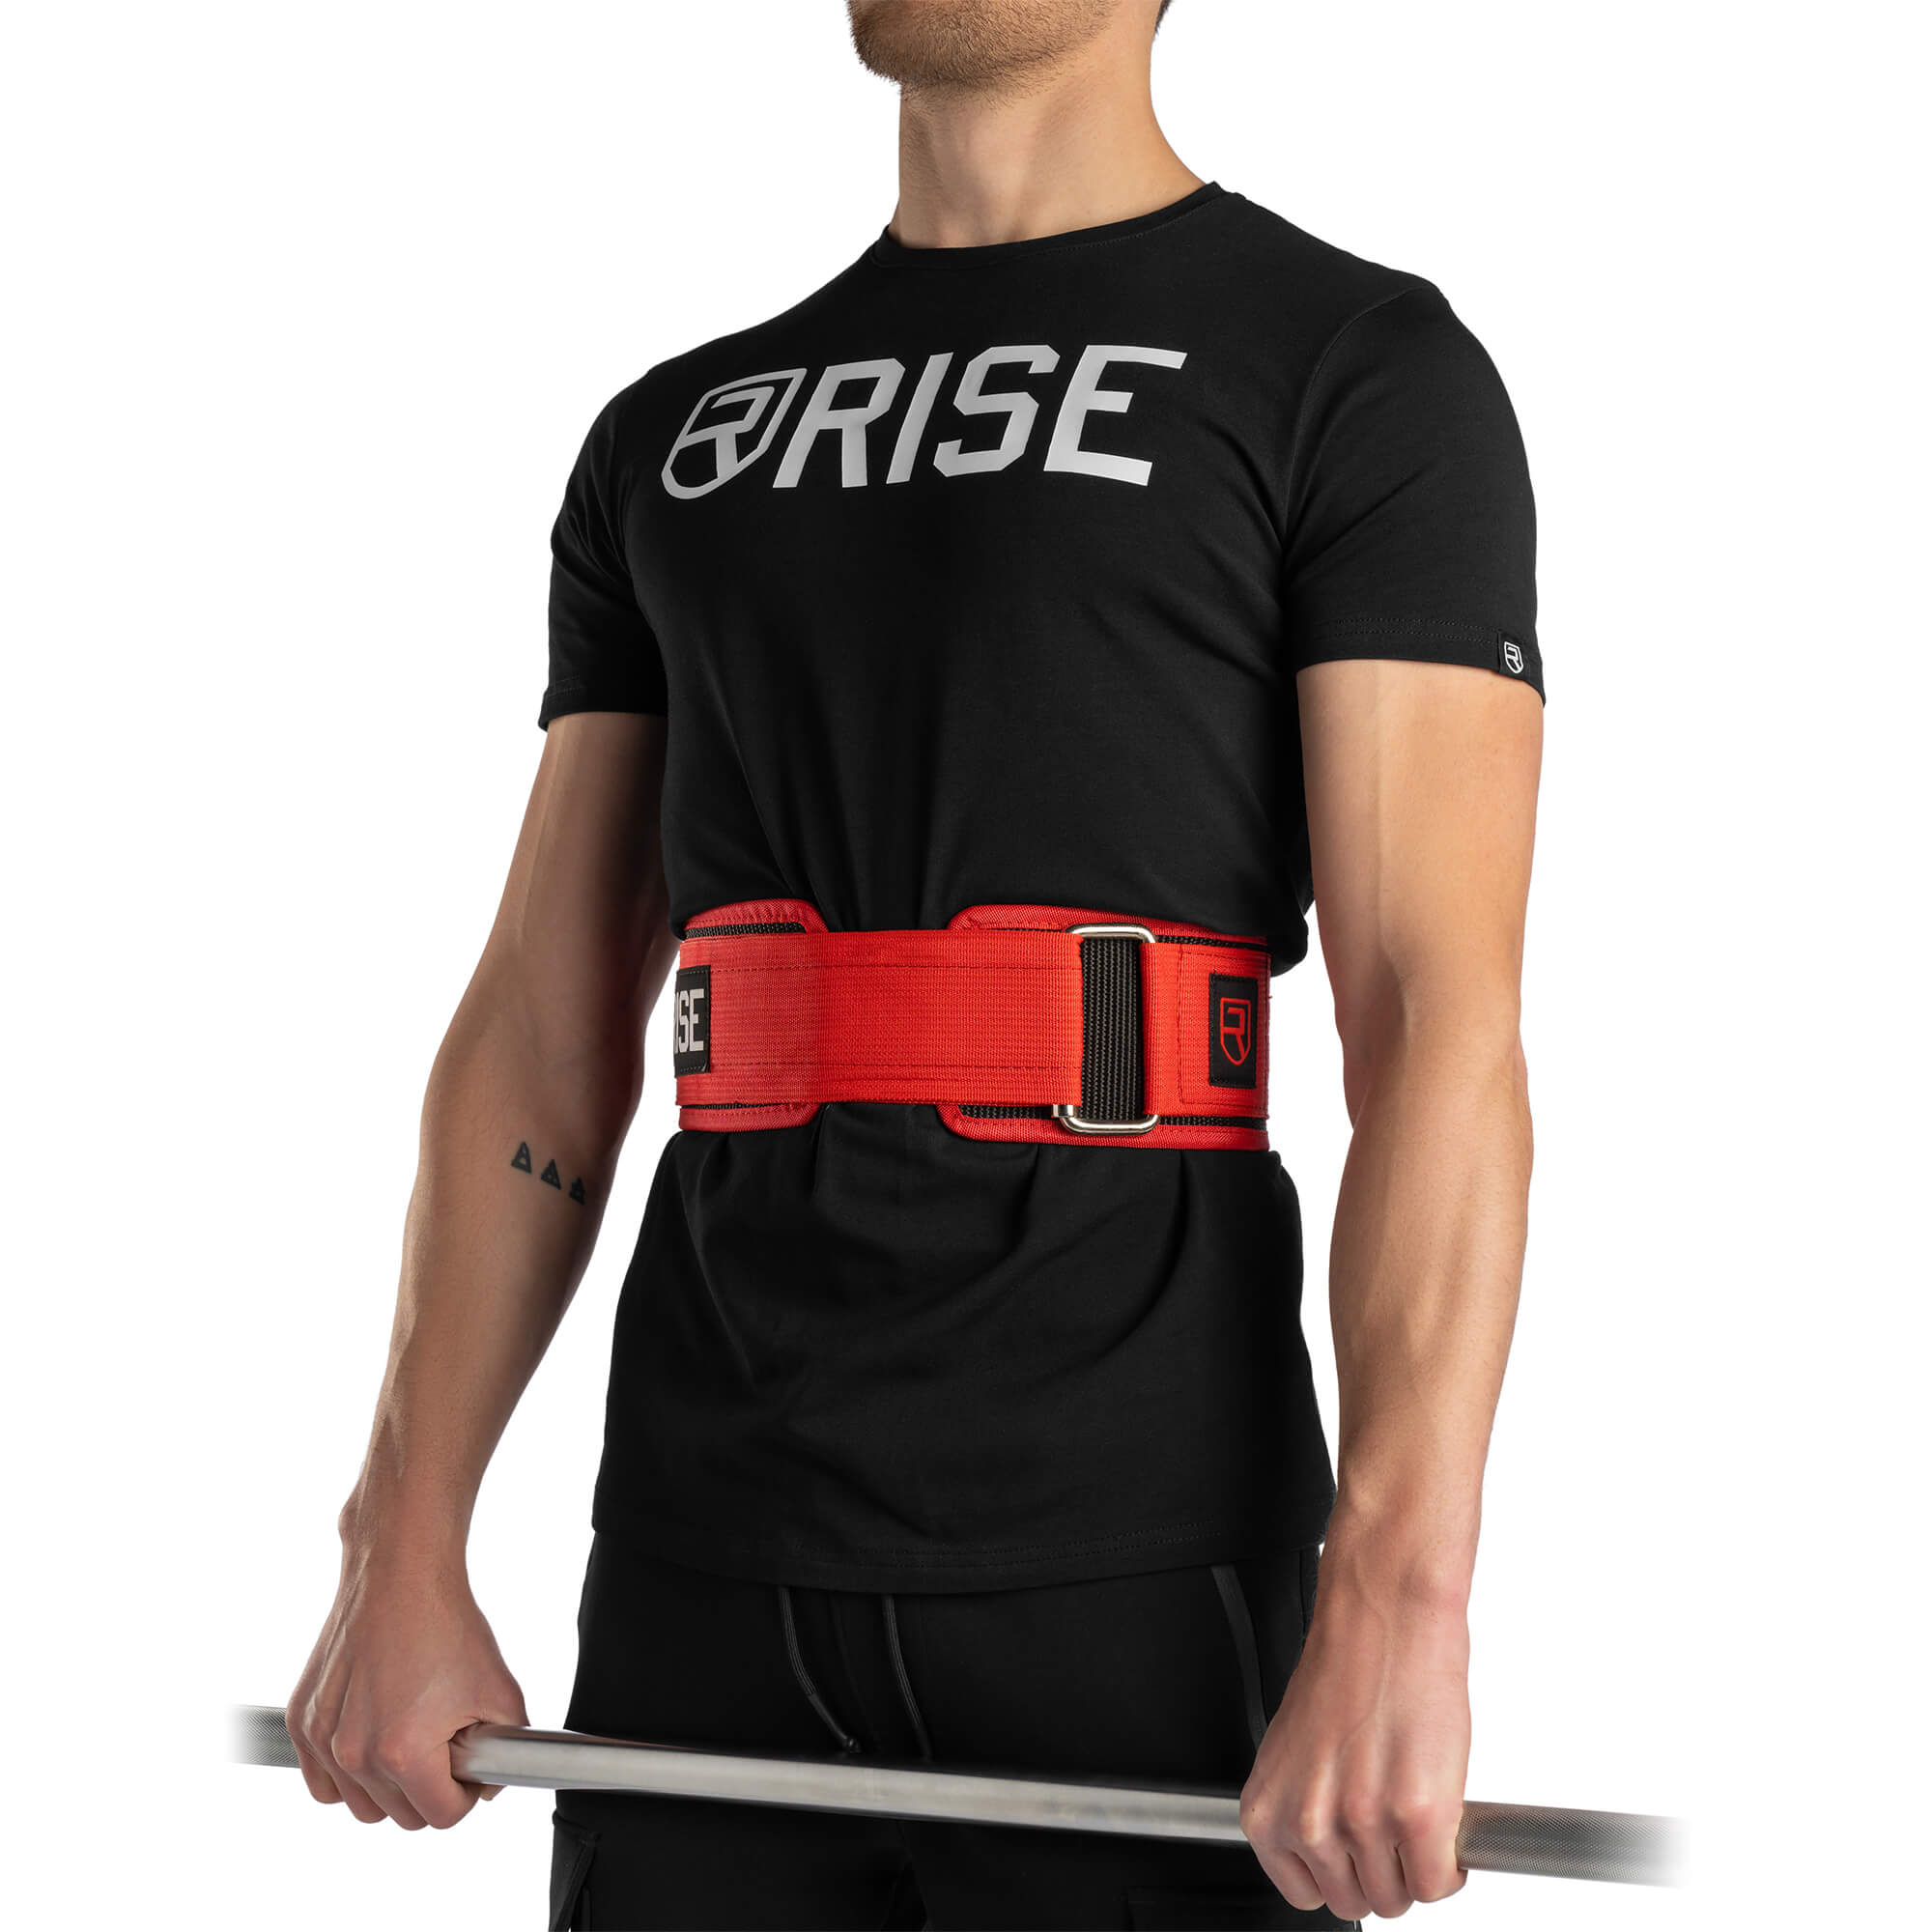 https://cdn.shopify.com/s/files/1/1550/7445/products/neoprene-belt-red-2_68b6c2b8-9d13-416b-8a0e-3db37837a9d4_2000x.jpg?v=1645913536